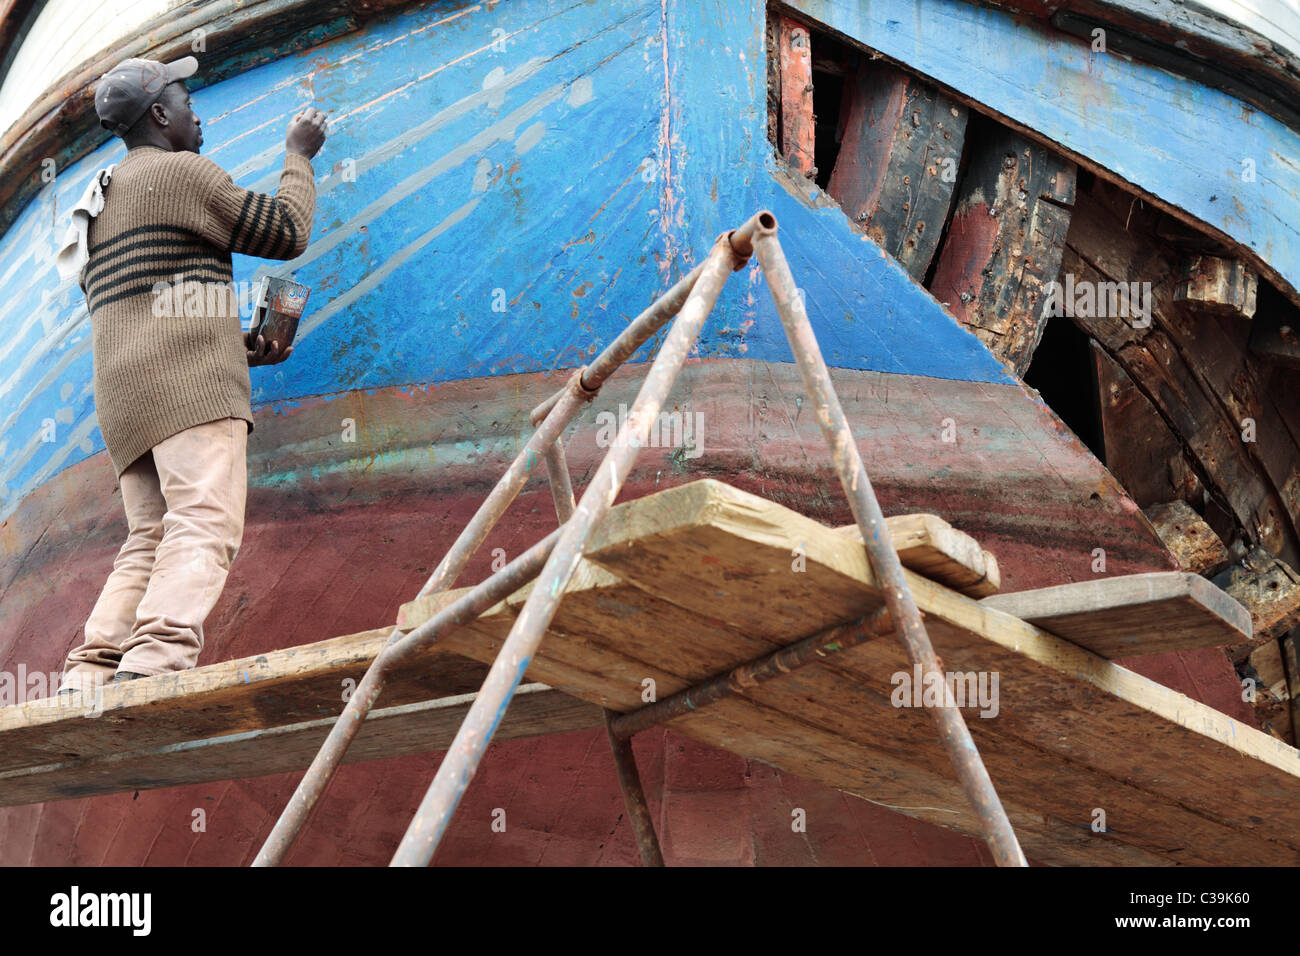 Workman painting repaired hull of wooden fishing boat in a ...